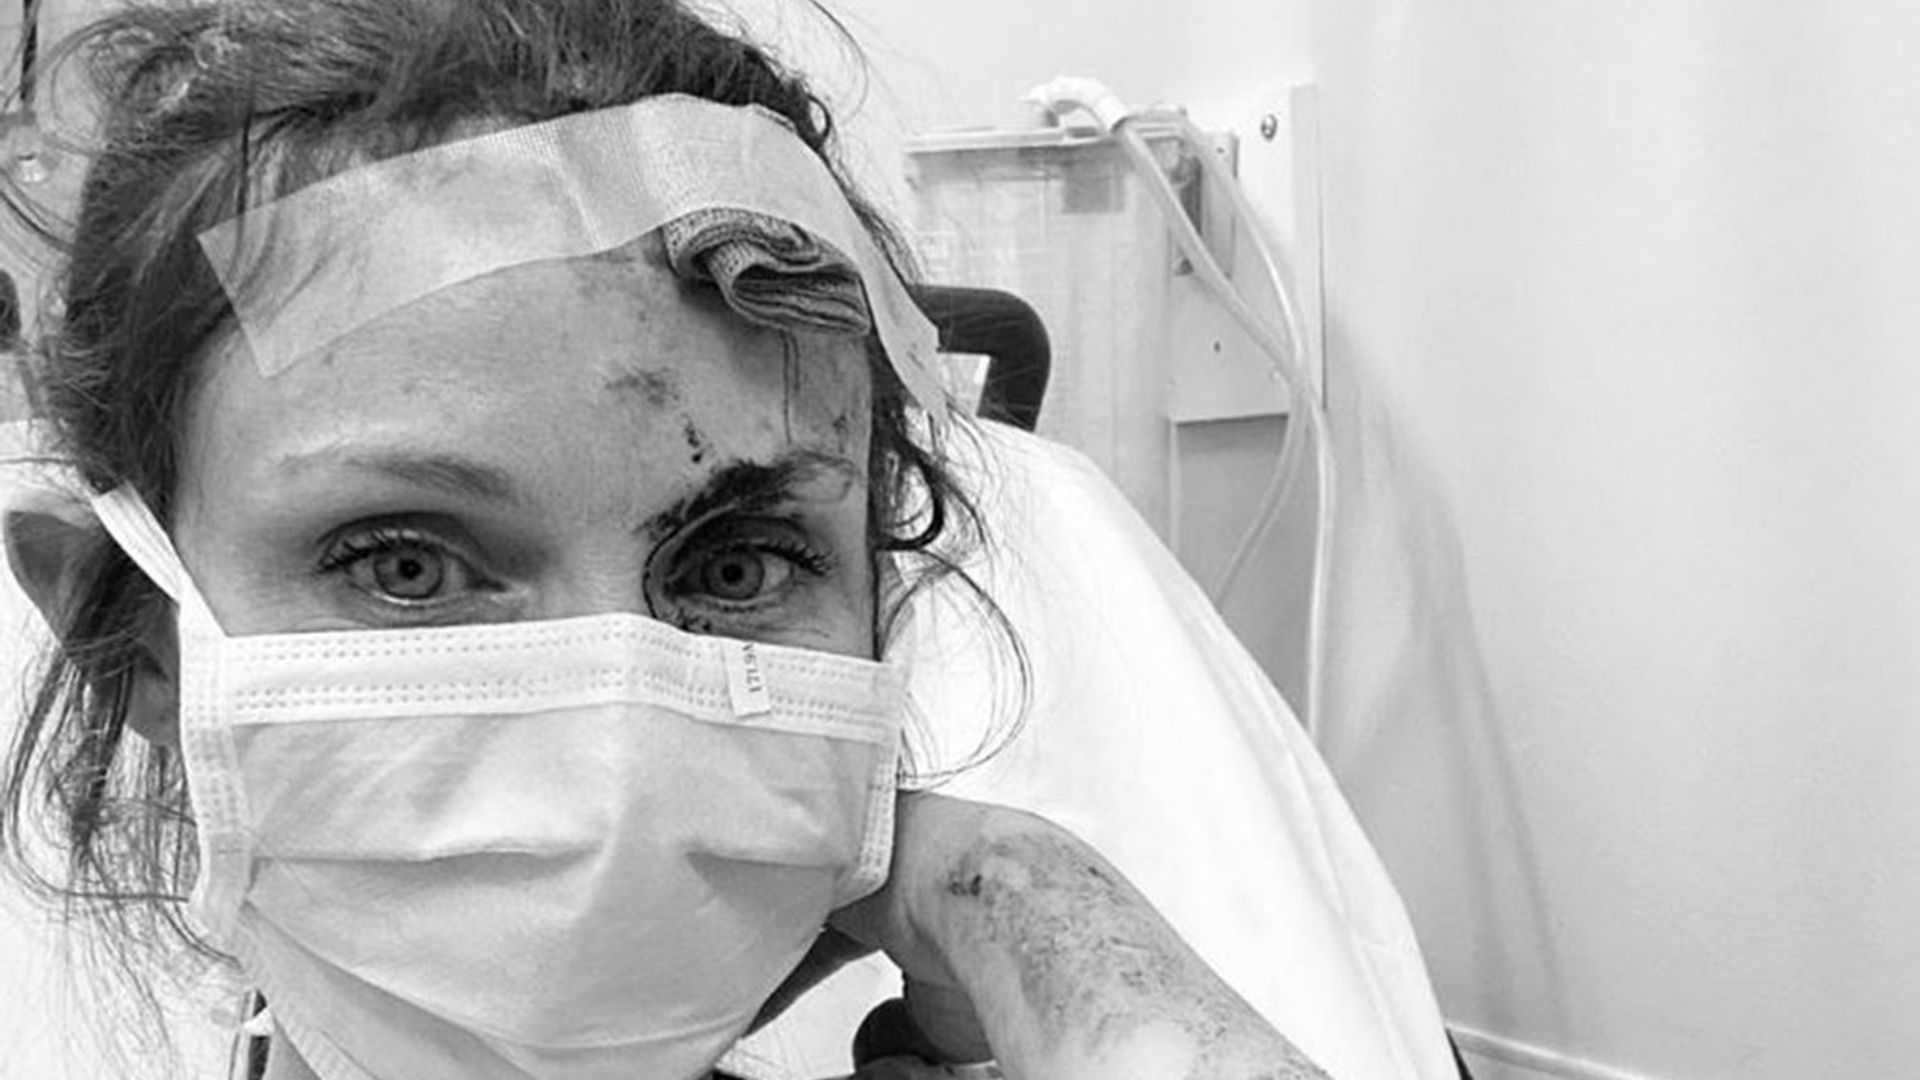 Sophie Ellis-Bextor shares 'gory' photo from hospital after horrific bike accident